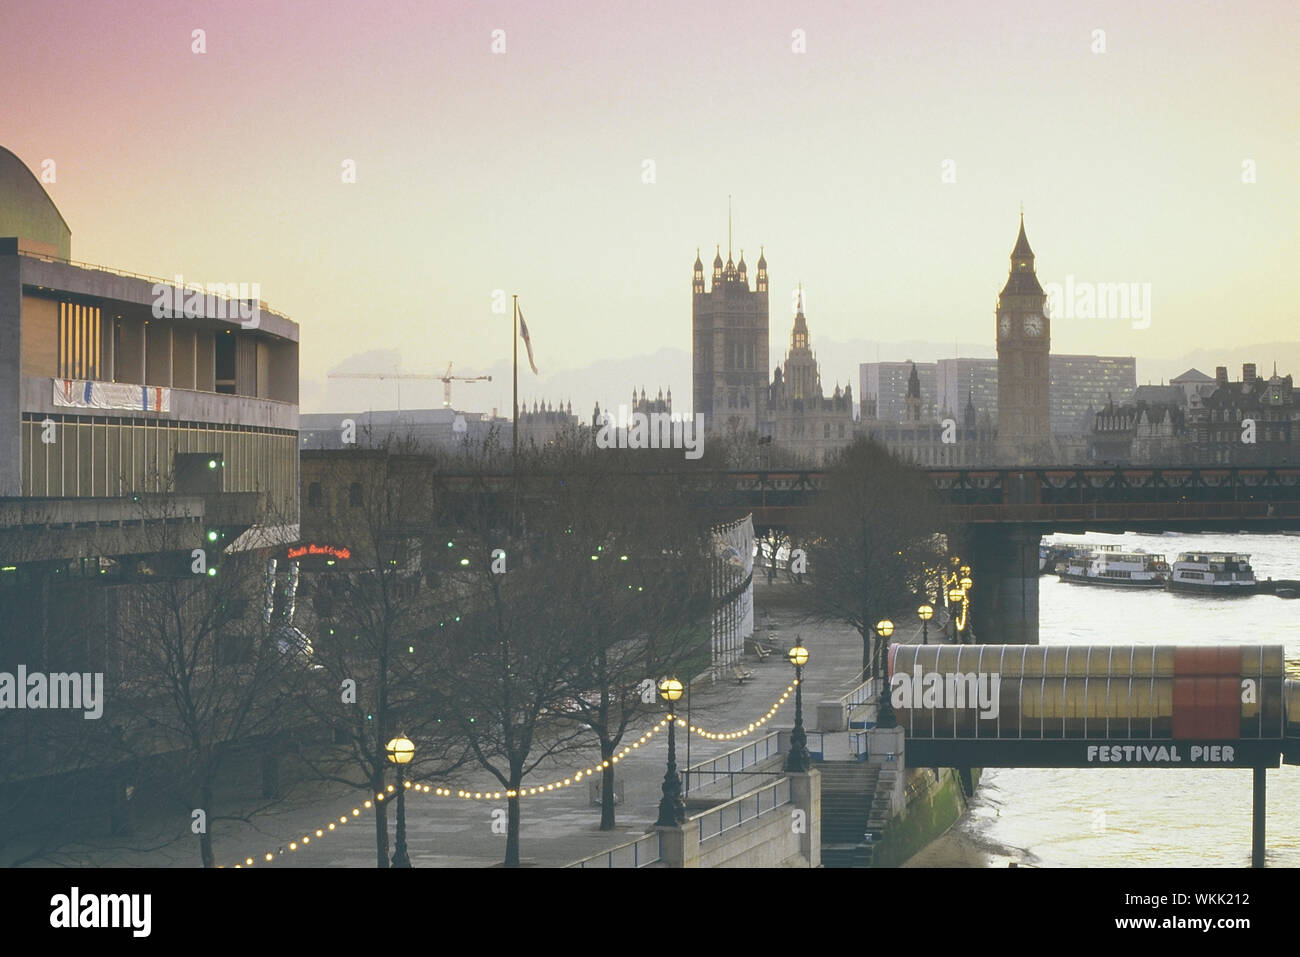 Royal Festival Hall and The Houses of Parliament, Southbank, London, England, UK. Circa 1980's Stock Photo